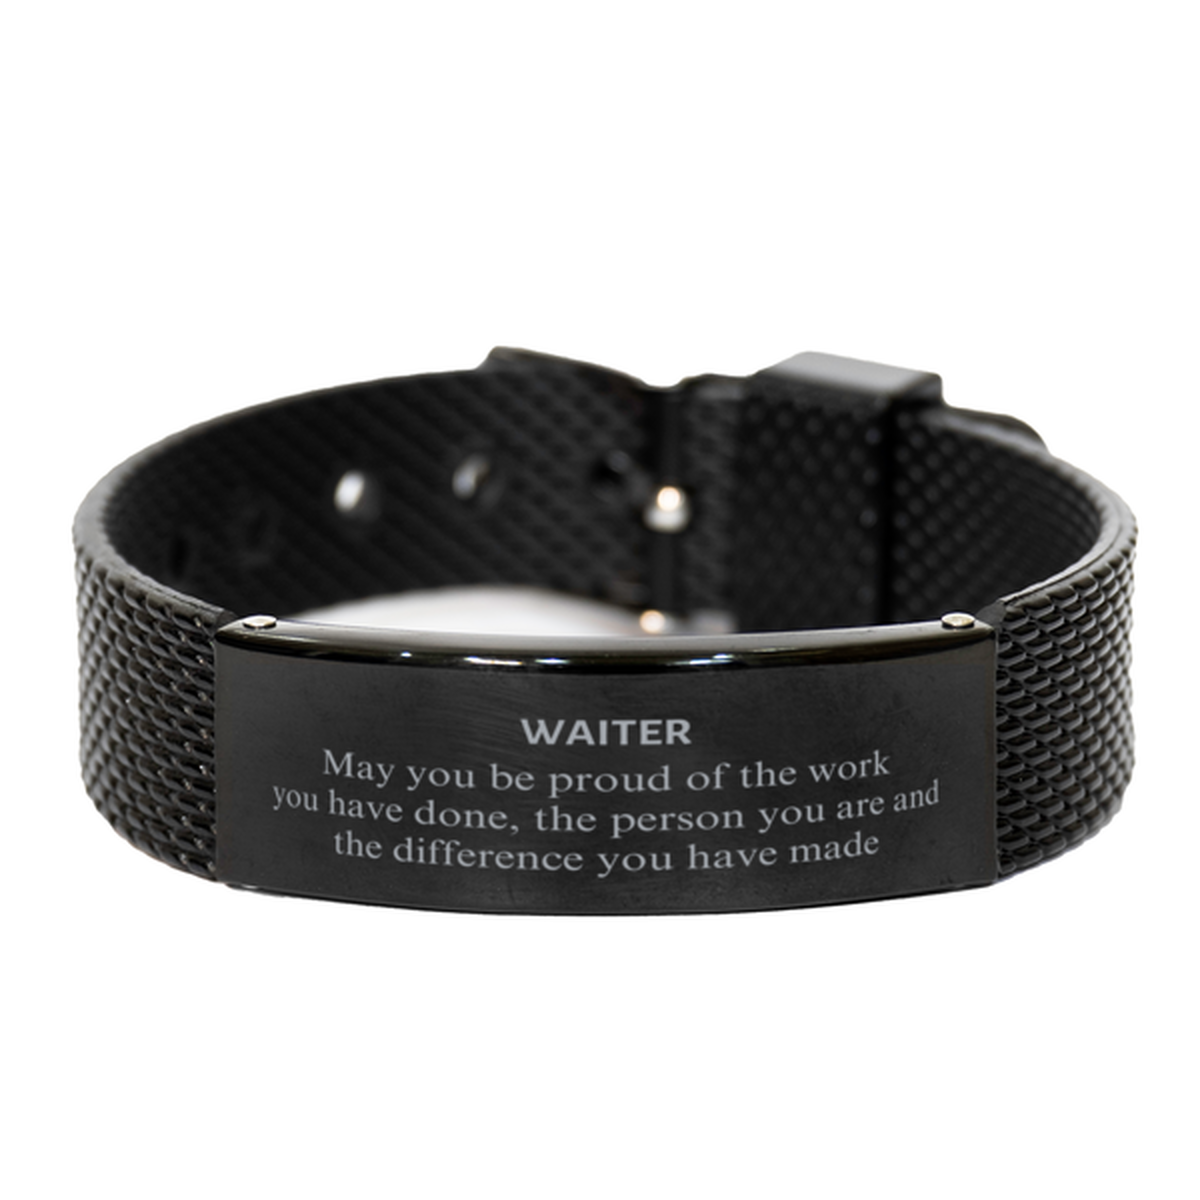 Waiter May you be proud of the work you have done, Retirement Waiter Black Shark Mesh Bracelet for Colleague Appreciation Gifts Amazing for Waiter